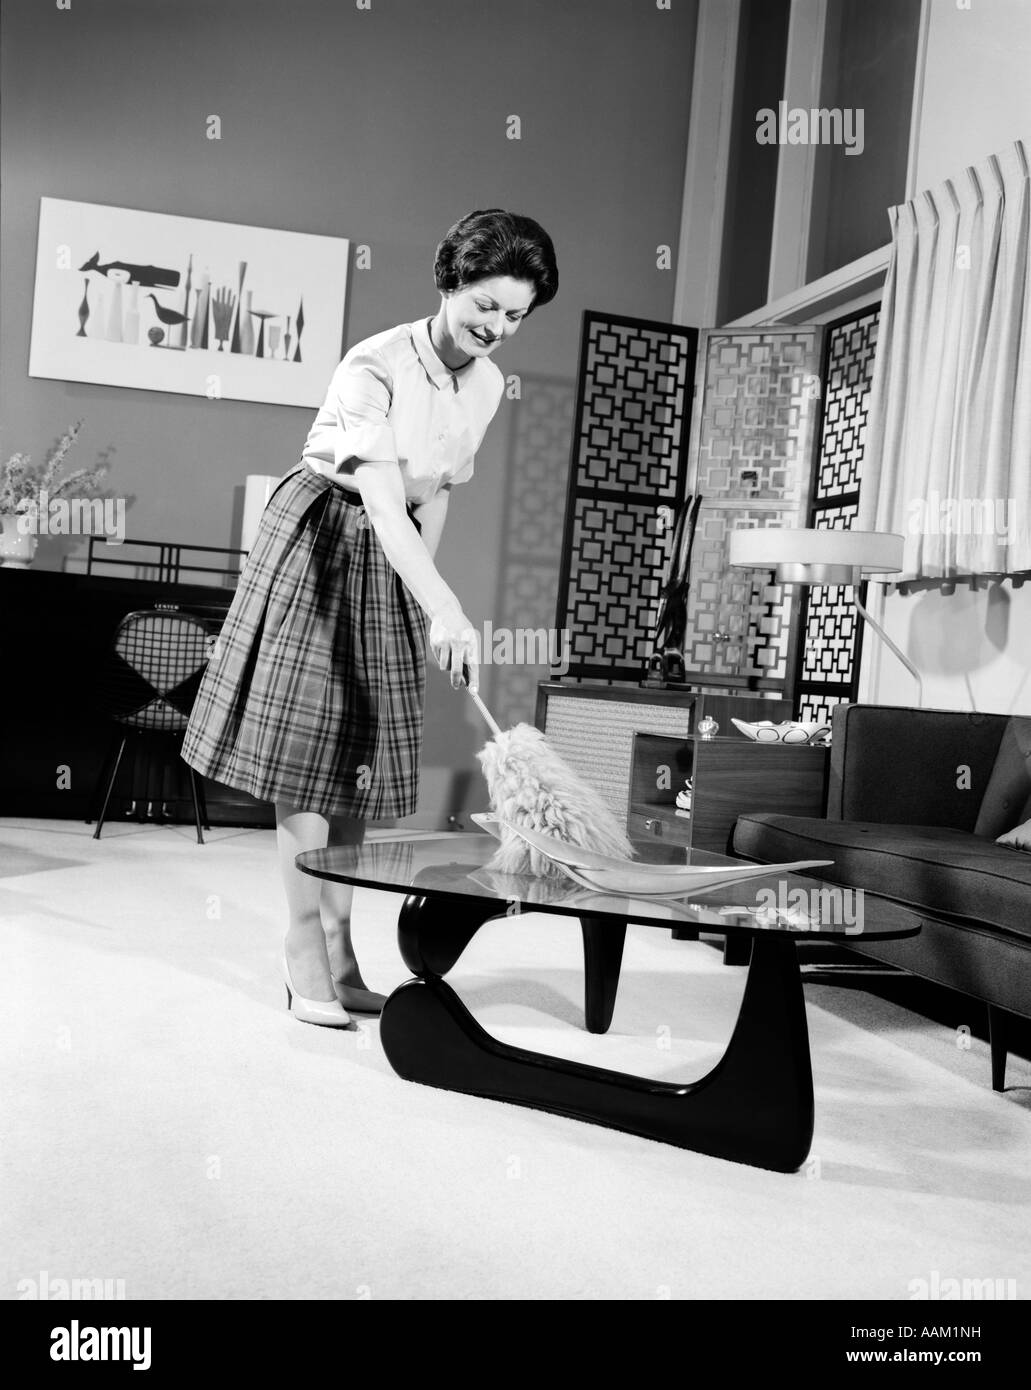 1950s WOMAN WEARING A WHITE BLOUSE & PLAID SKIRT DUSTING WITH A FEATHER  DUSTER A GLASS TOP COFFEE TABLE Stock Photo - Alamy